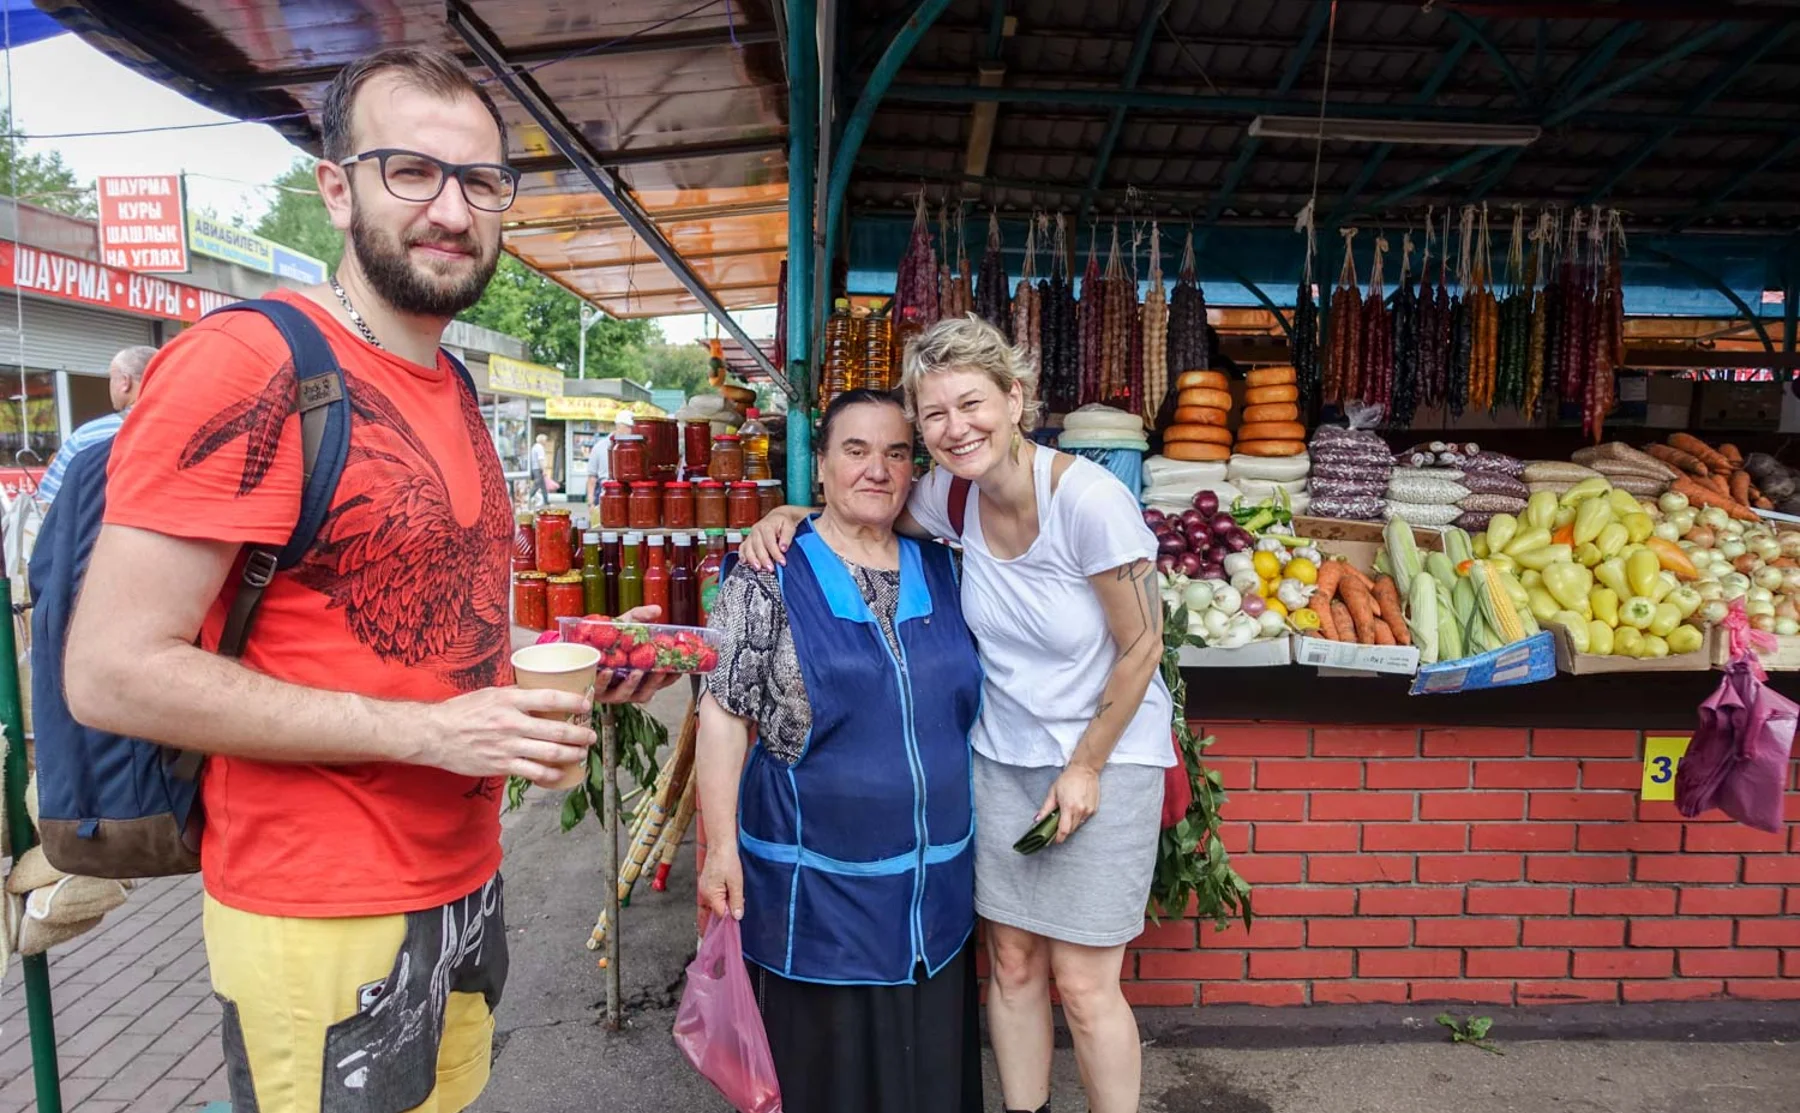 A Walk through Moscow’s Most Authentic Food Market  - 1261373